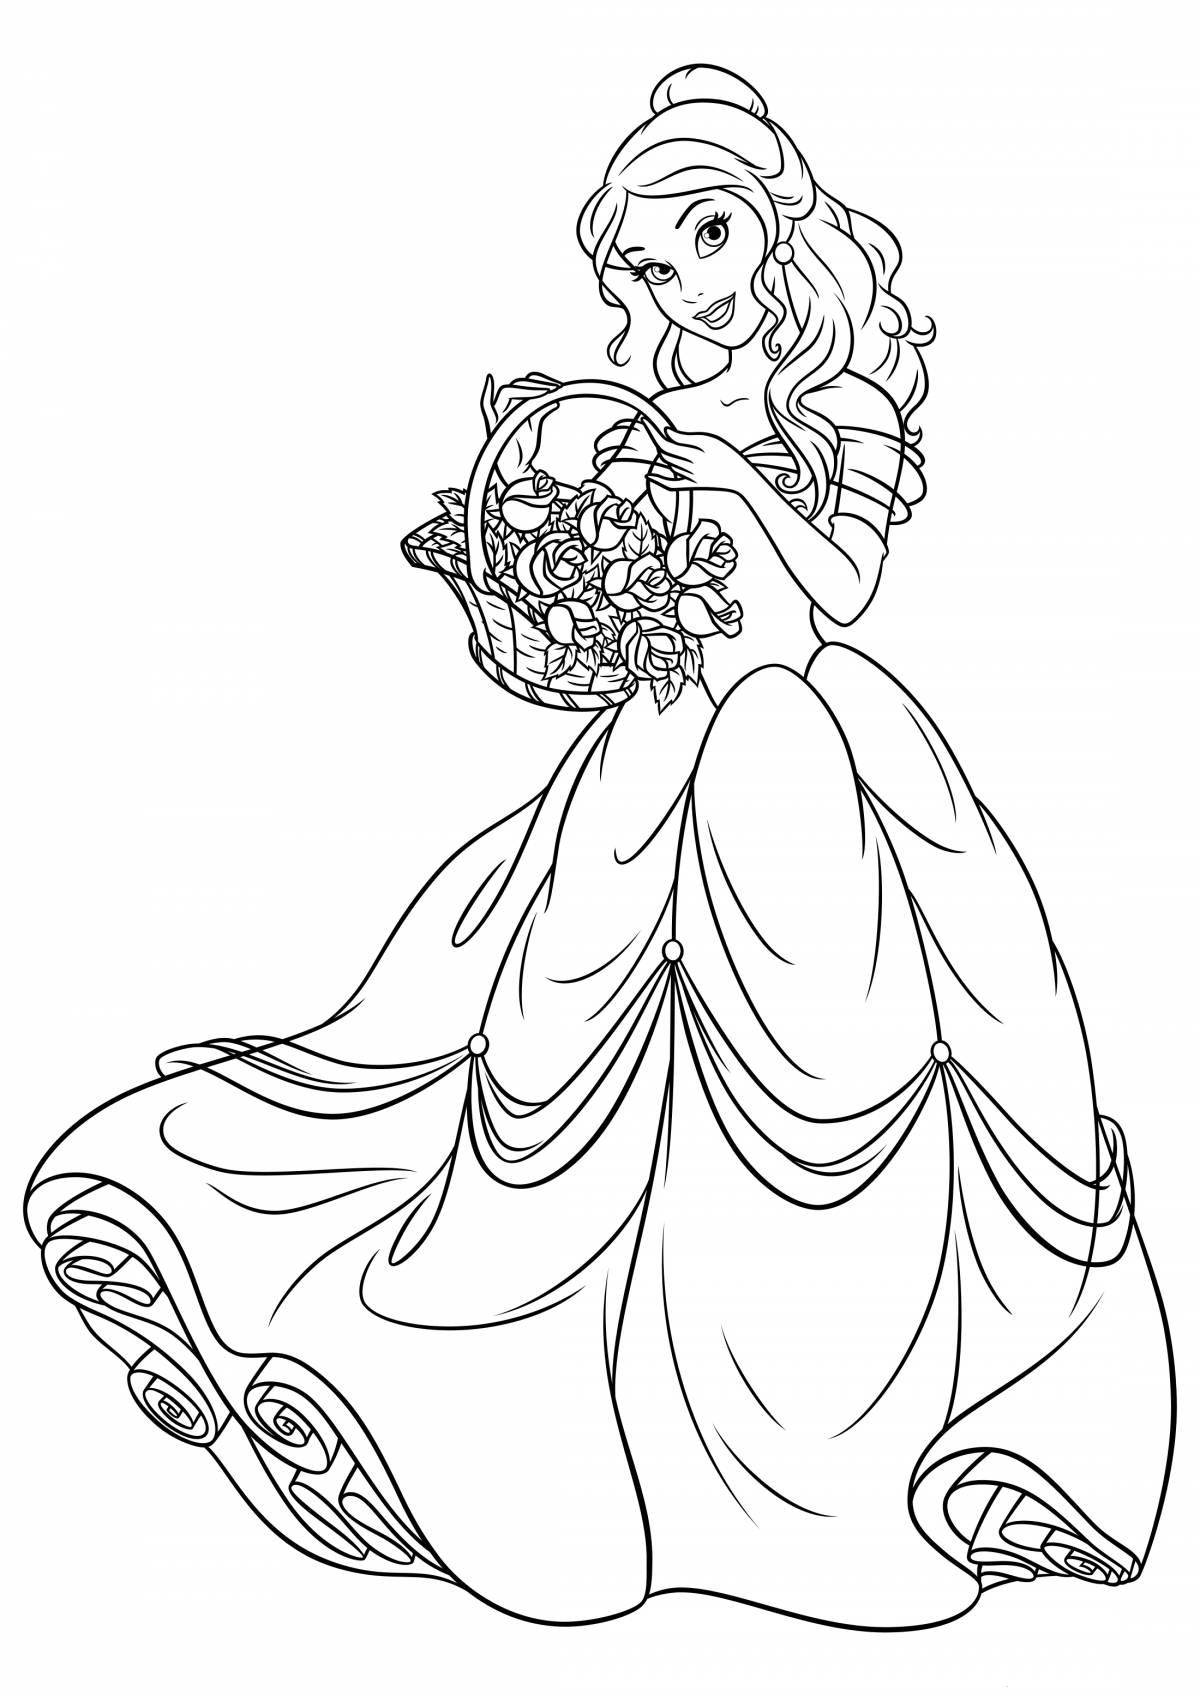 Glorious princess belle coloring page